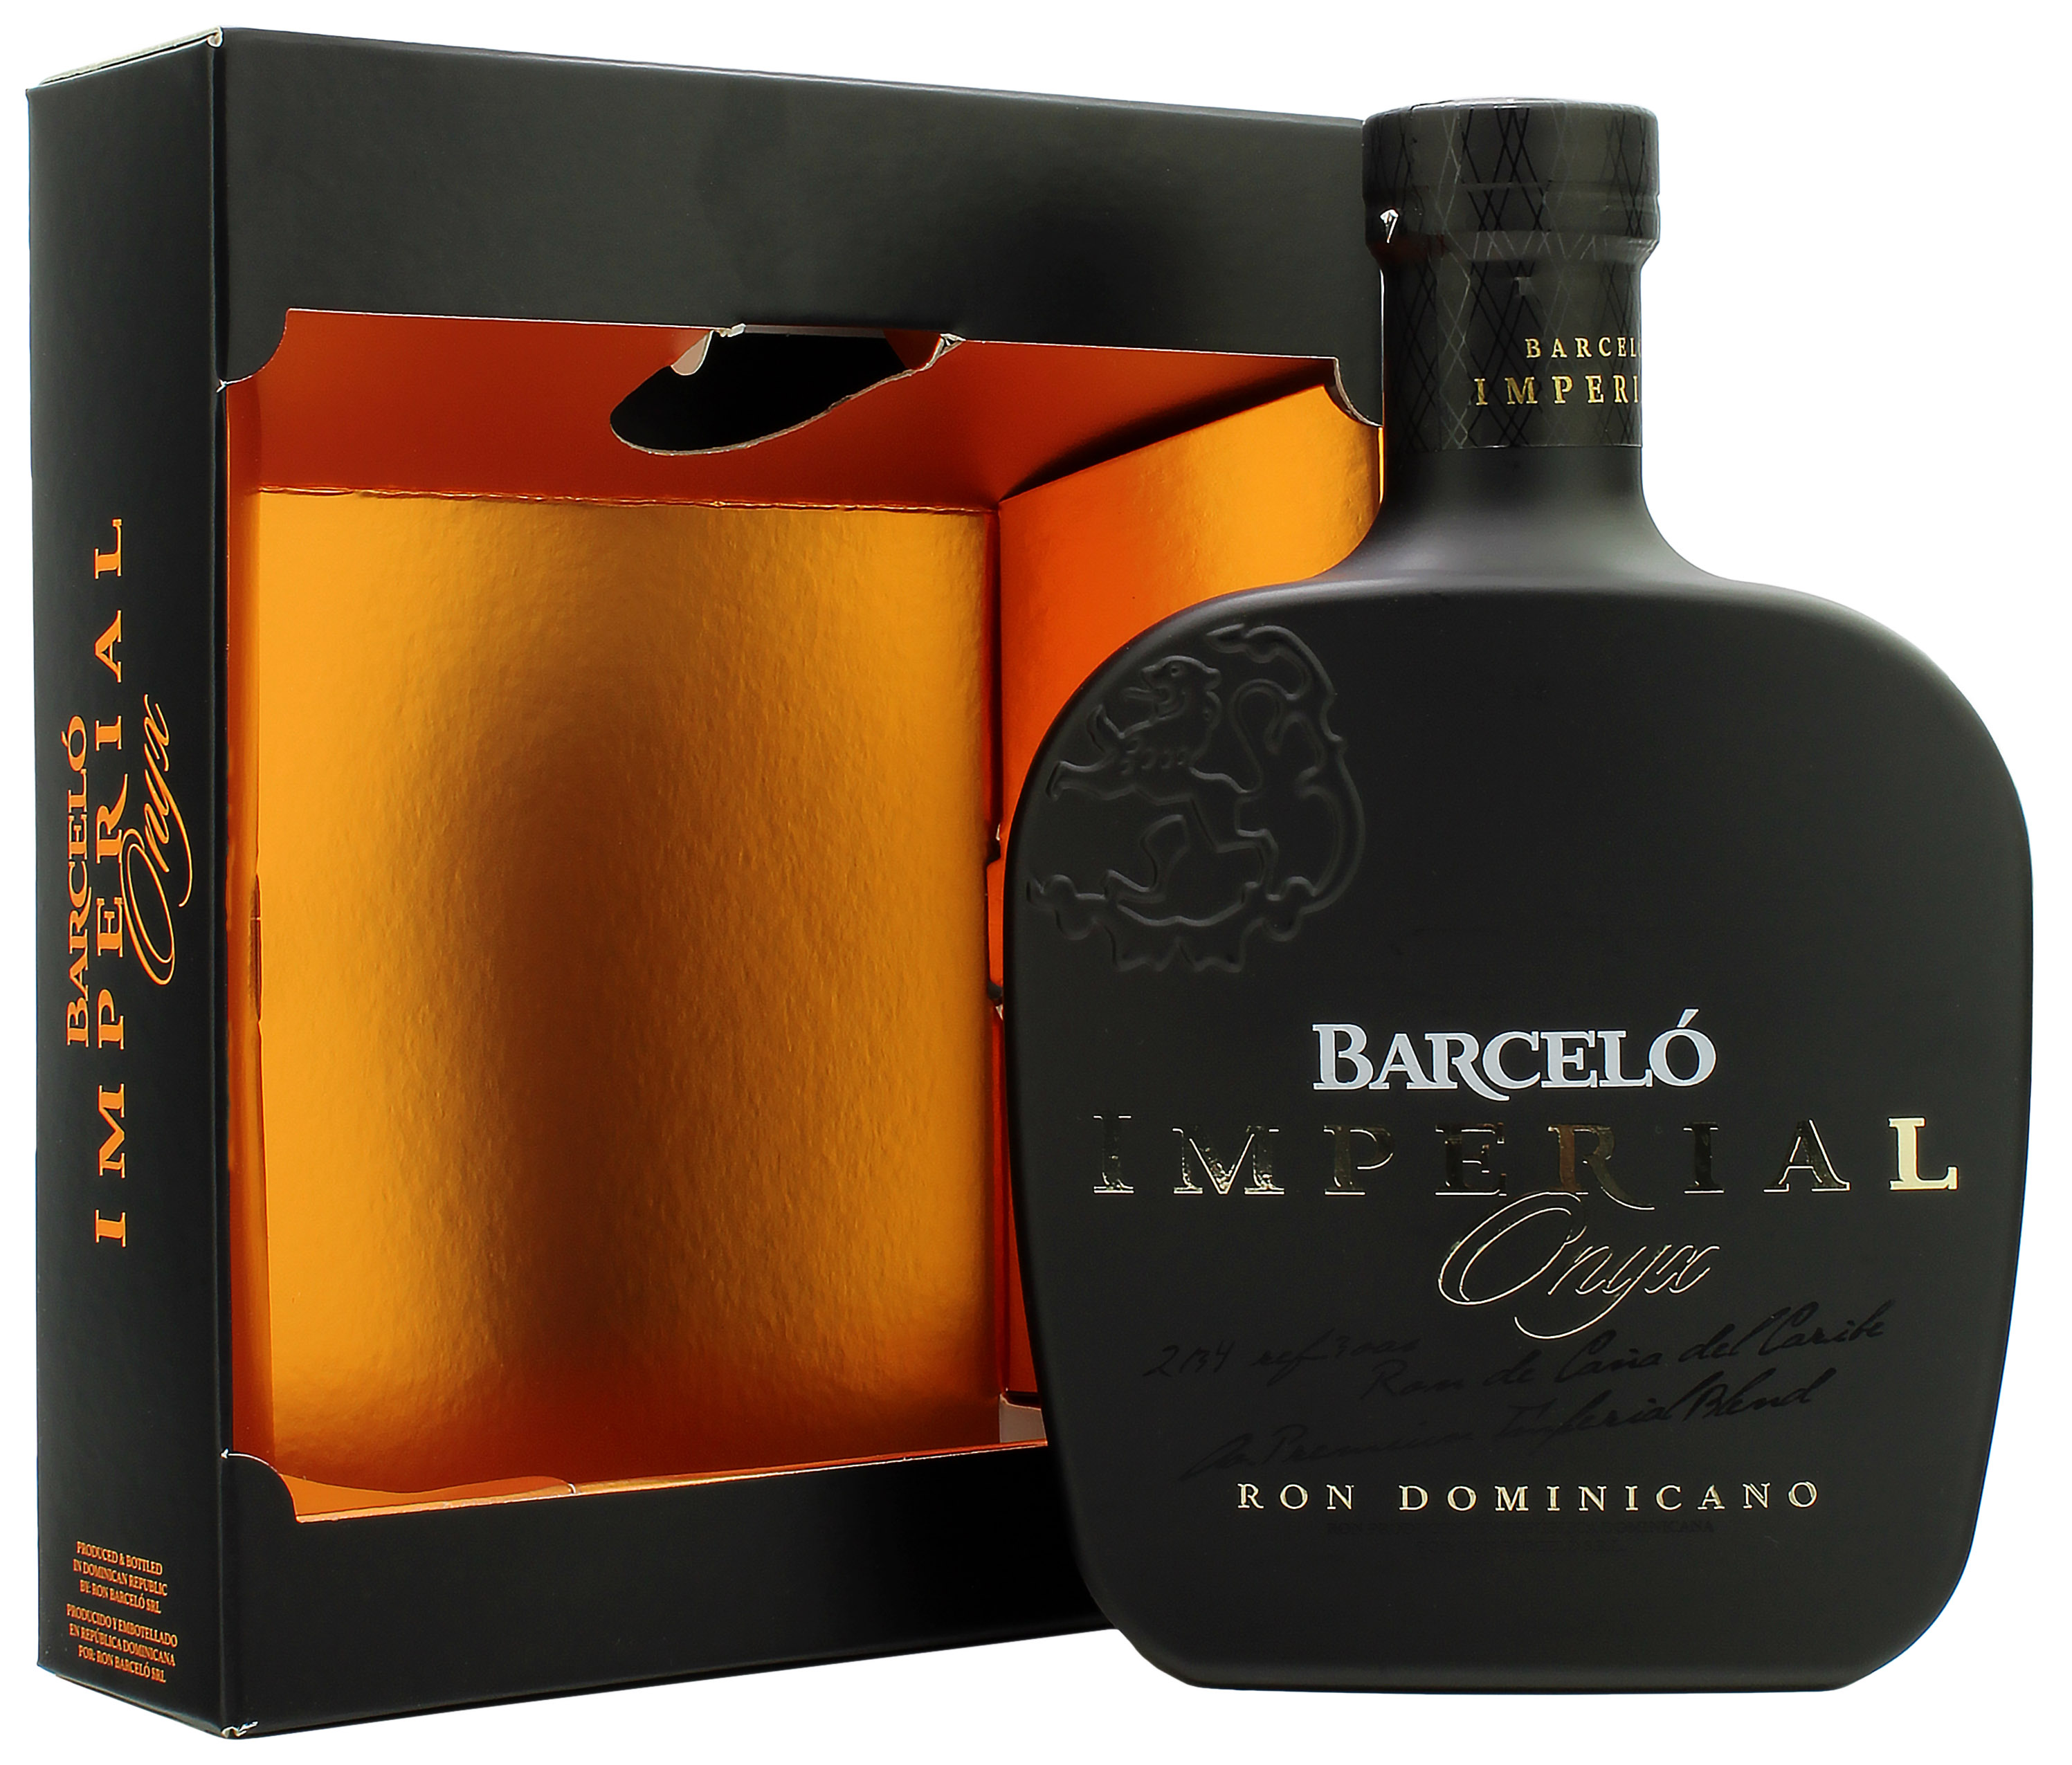 Ron Barcelo Imperial Onyx 38.0% 0,7l